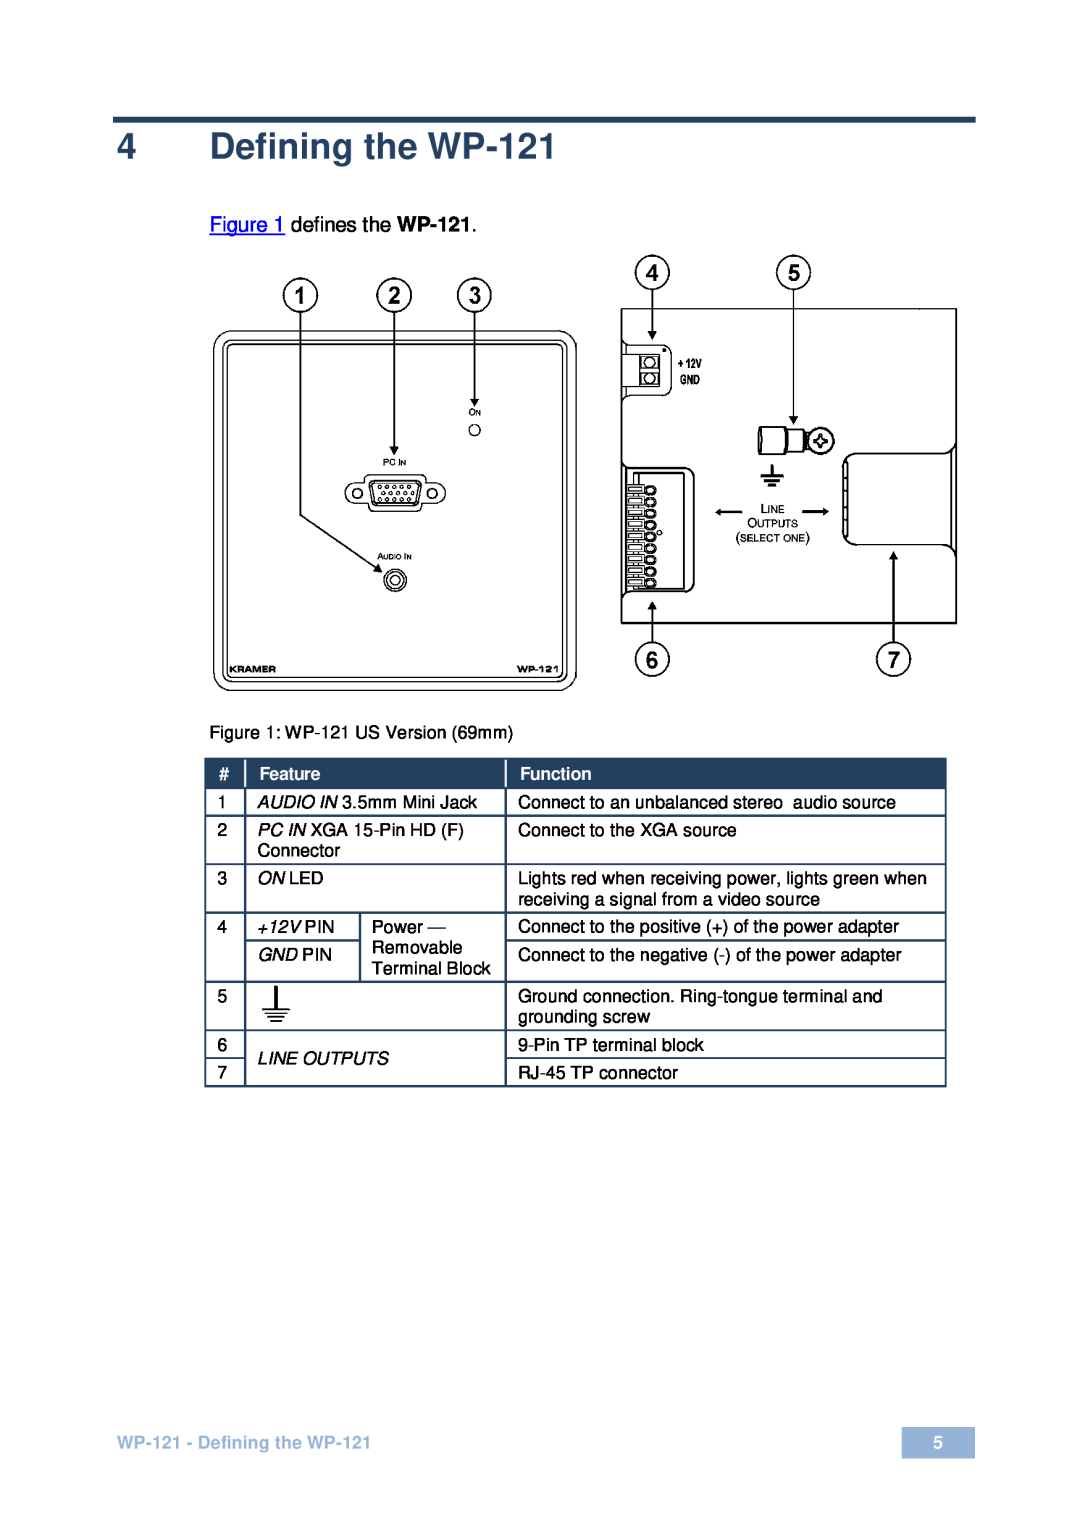 Kramer Electronics user manual Defining the WP-121, Feature, Function, On Led, +12V PIN, Gnd Pin, Line Outputs 